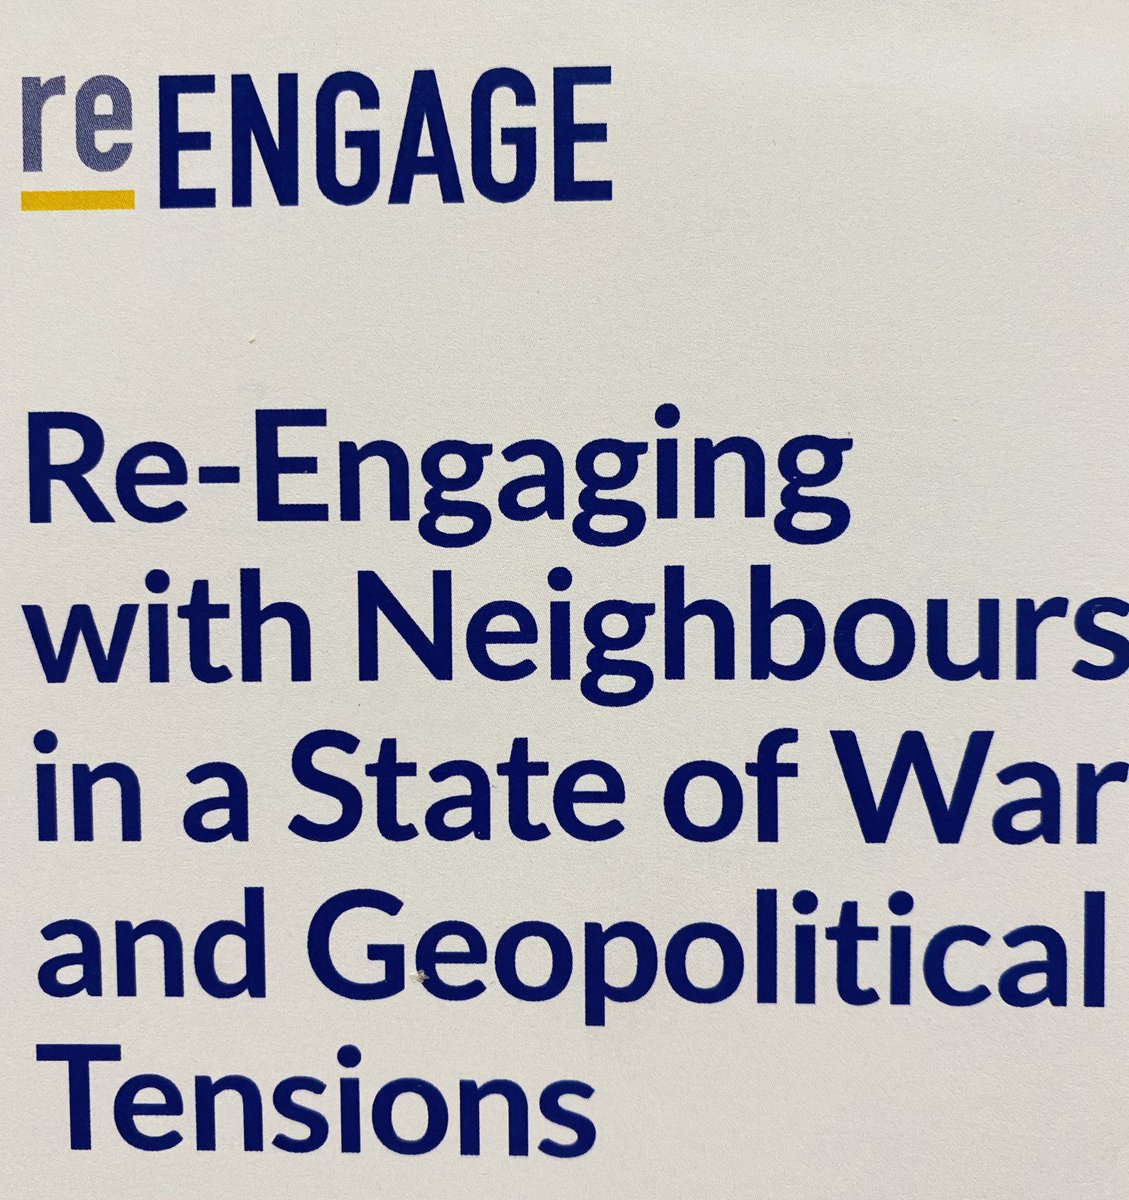 kick off in Bruxelles for the new @EUREngage #HorizonEurope project on war, democracy and the new EU enlargement. Glad to meet new and old colleagues and friends